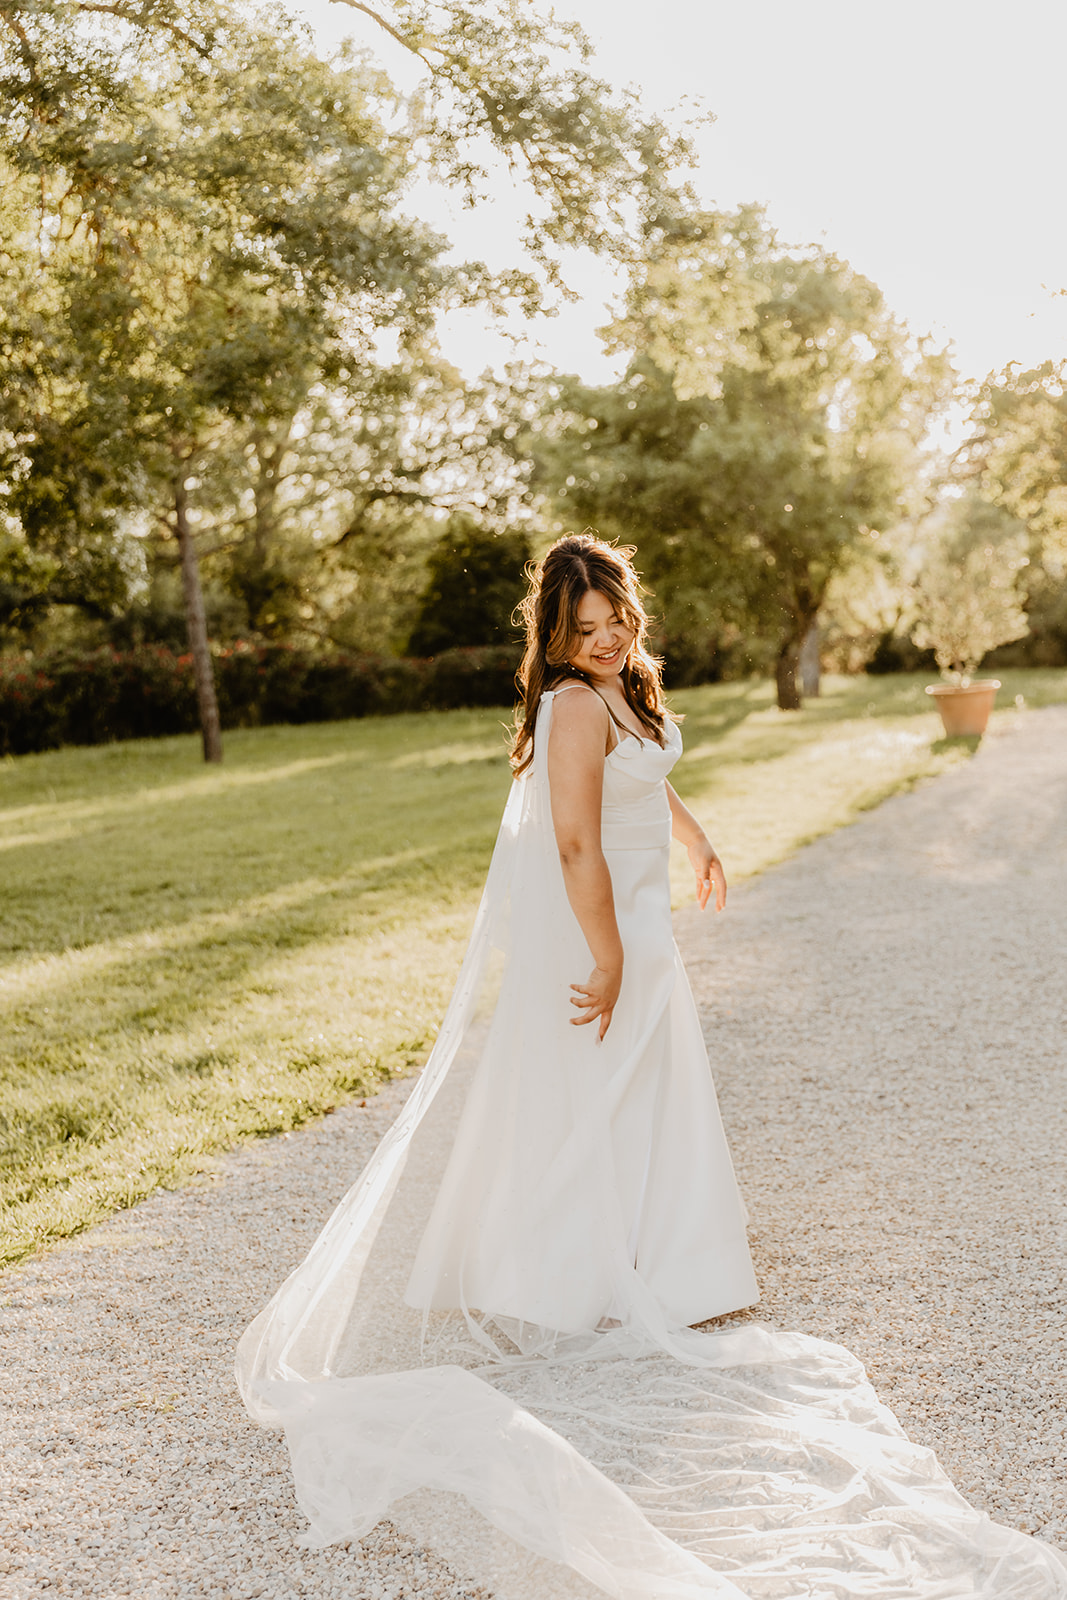 Bride during golden hour at a Destination Wedding in France. Photography & Videography by OliveJoy Photography